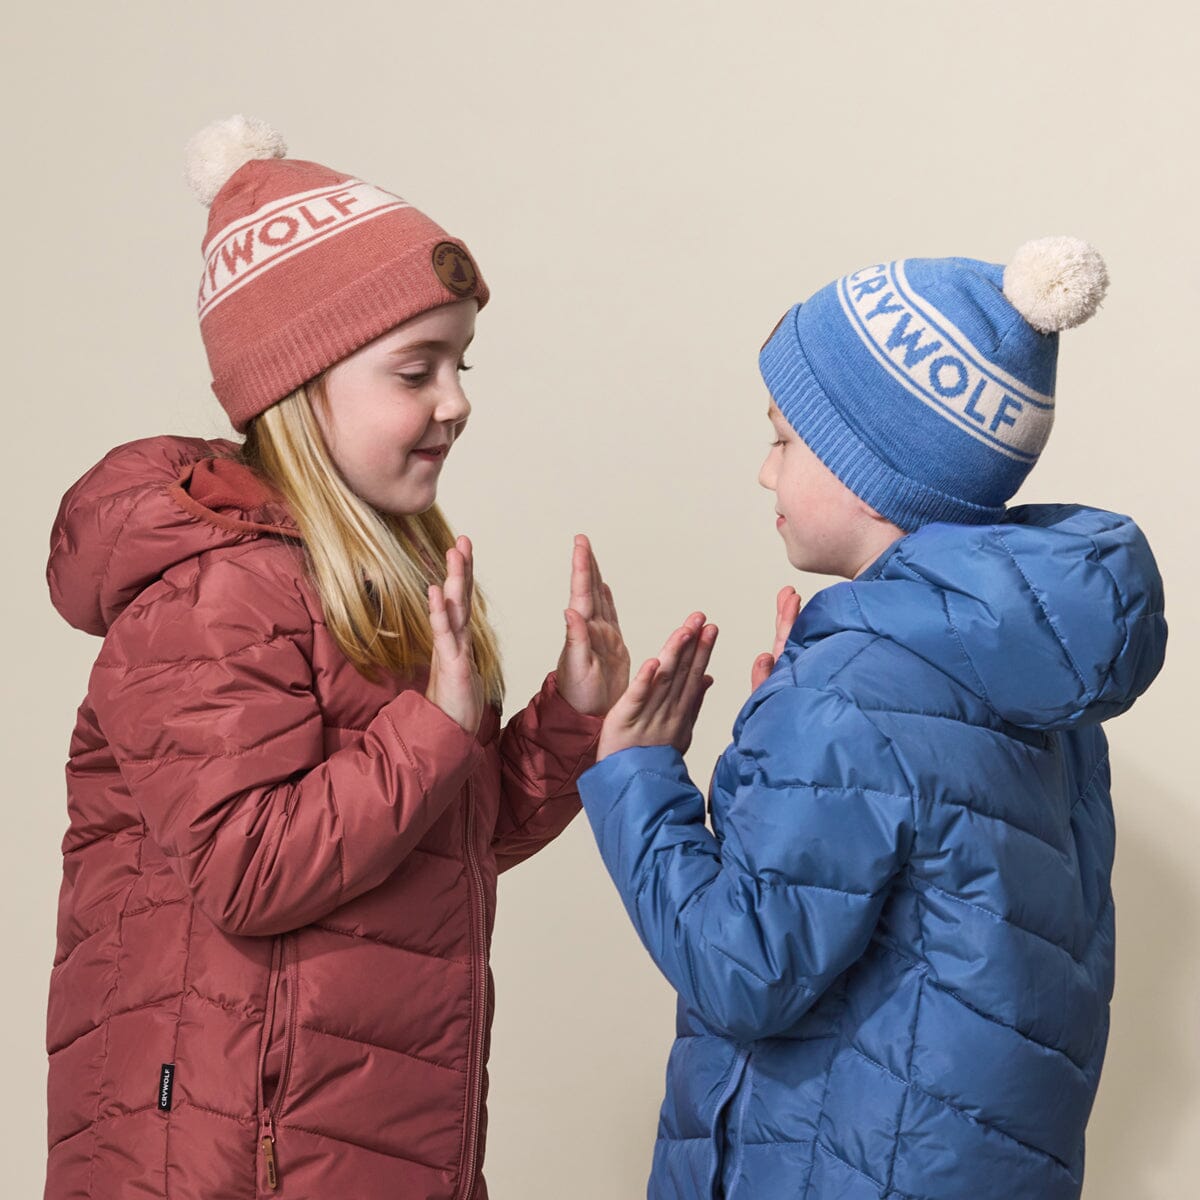 Crywolf | ECO PUFFER - Southern Blue *** PRE ORDER / DUE EARLY-MID APRIL *** Boys Crywolf